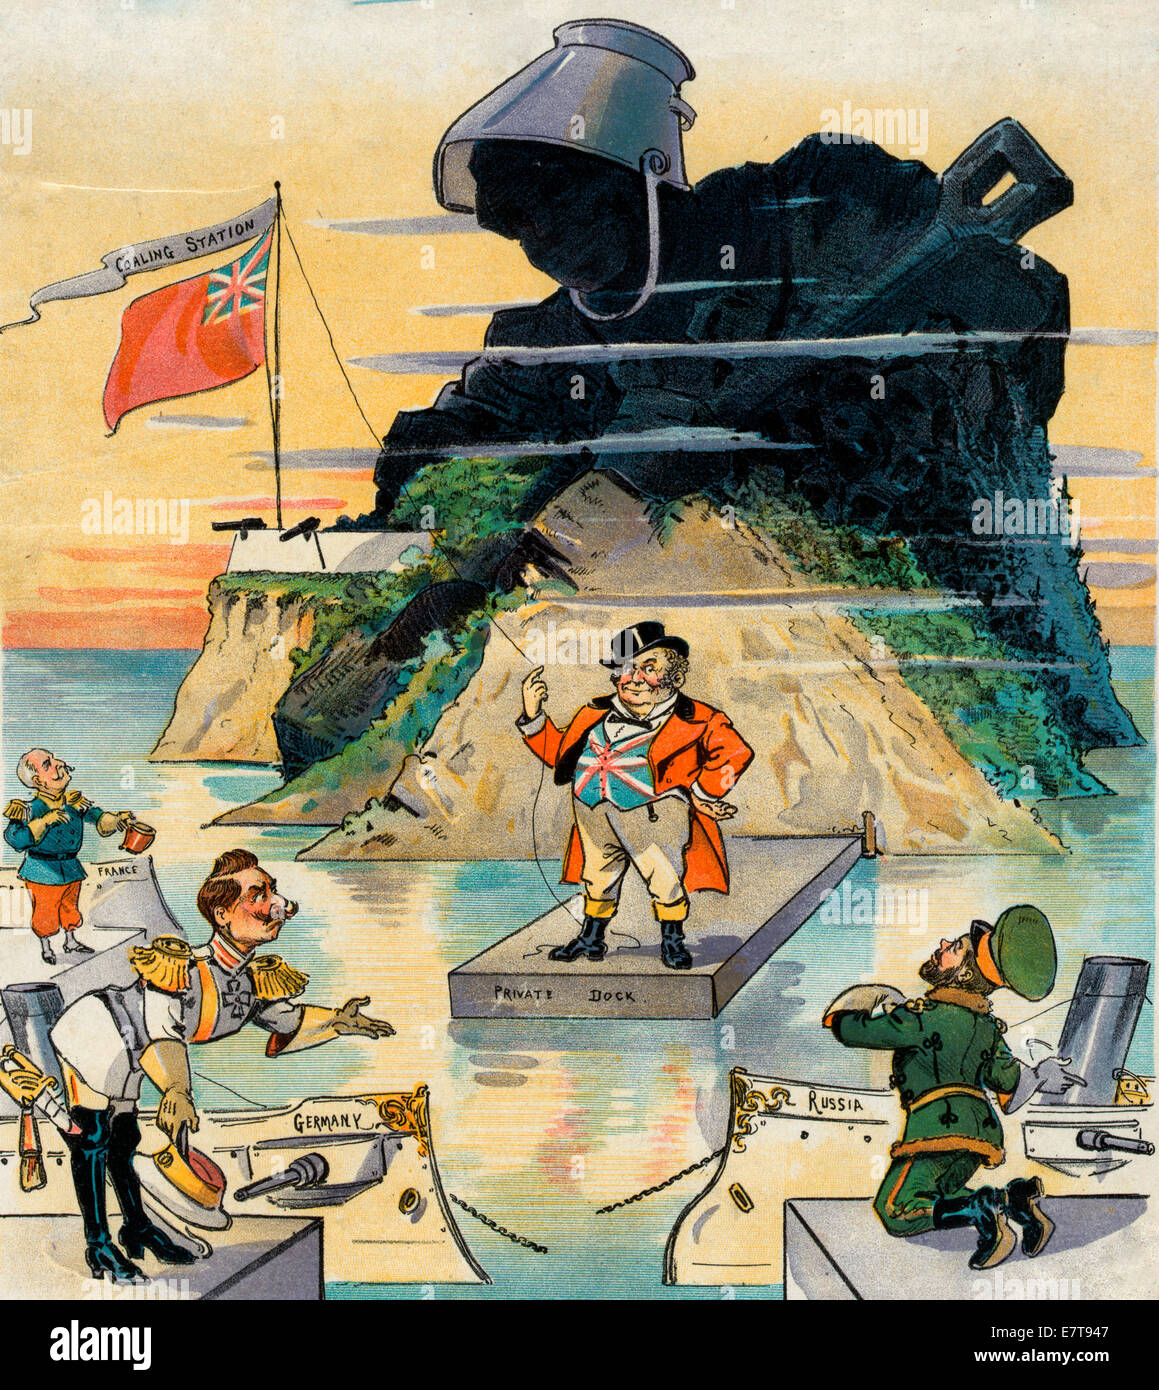 Coal is king in the far east - John Bull standing on a 'Private Dock' to an island labeled 'Coaling Station' that shows an anthropomorphic mountain of coal; in the foreground are William II bowing next to a ship labeled 'Germany', Nicholas II kneeling next to a ship labeled 'Russia', and Felix Faure tipping his hat next to a ship labeled 'France', they are supplicating John Bull. Stock Photo